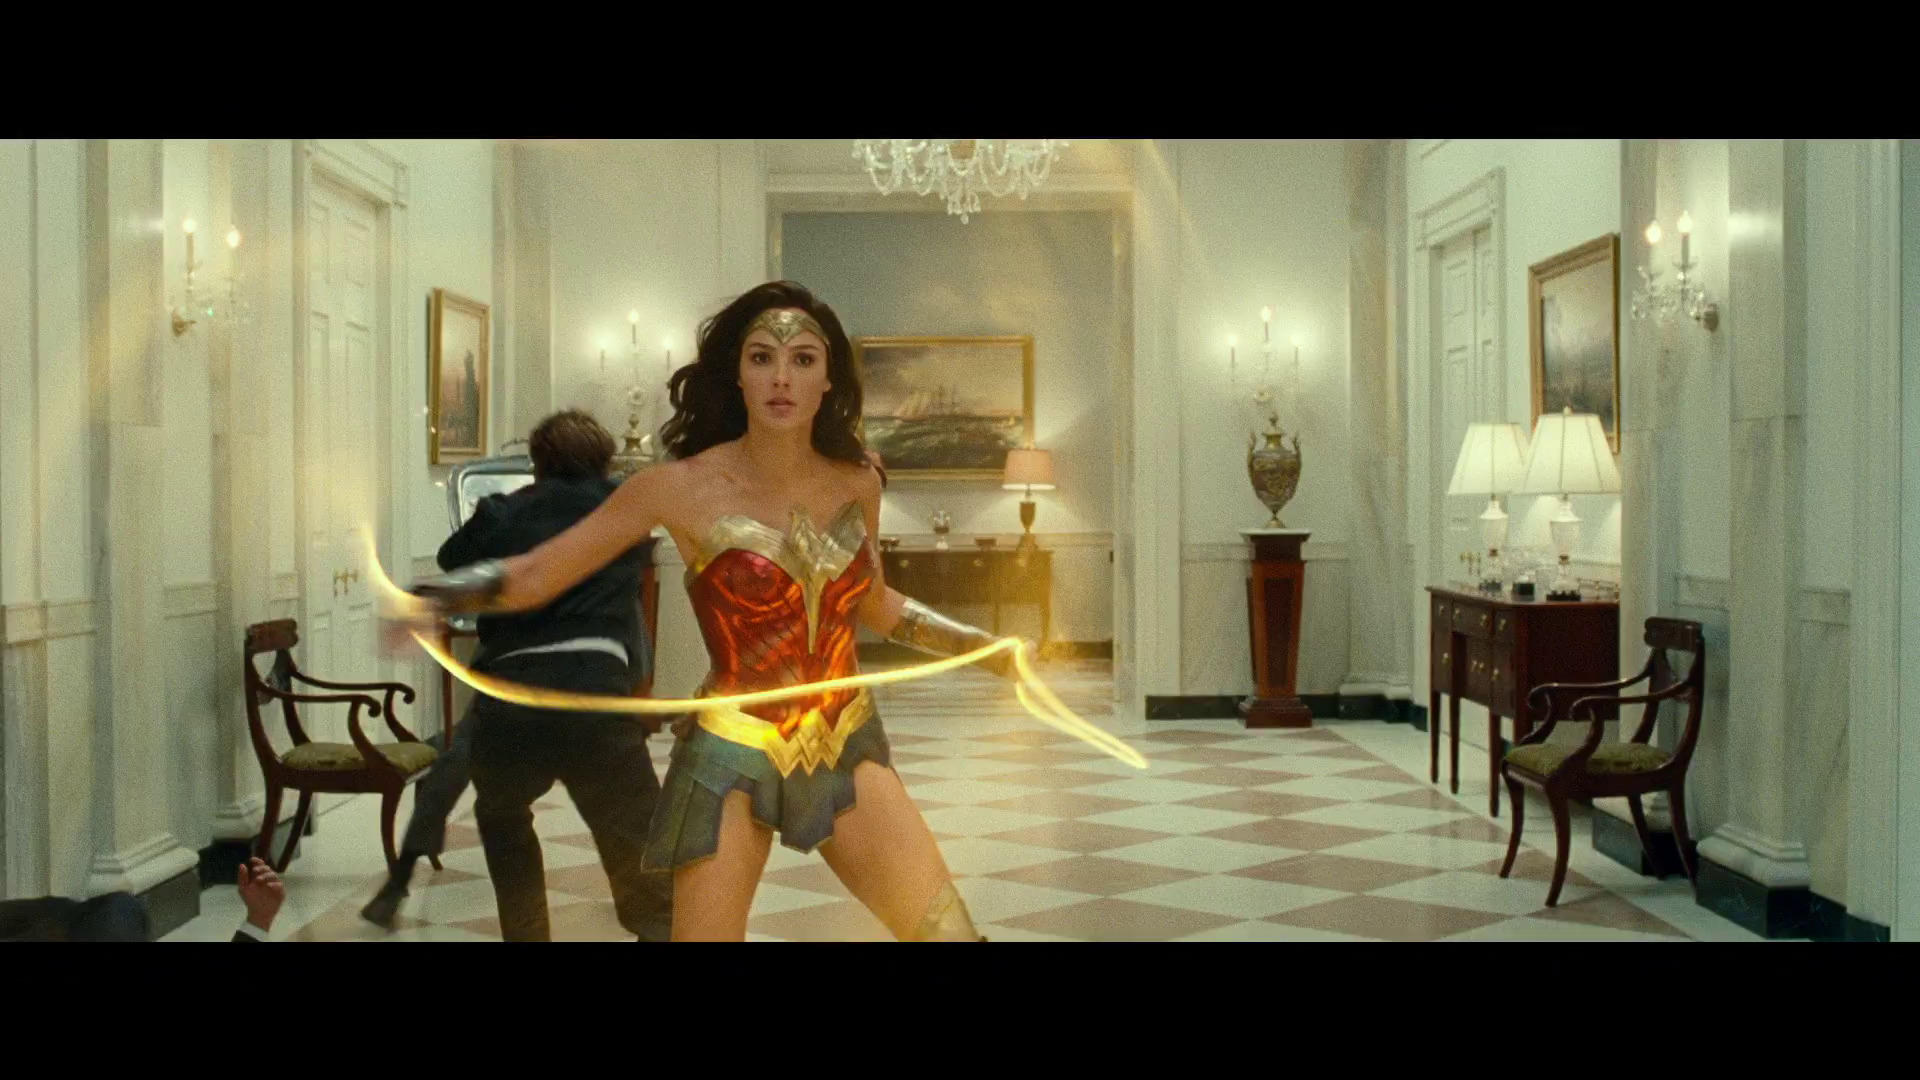 Wonder Woman (Gal Gadot) rushes to save the President of the United States in Wonder Woman 1984 (2020), Warner Bros. Pictures